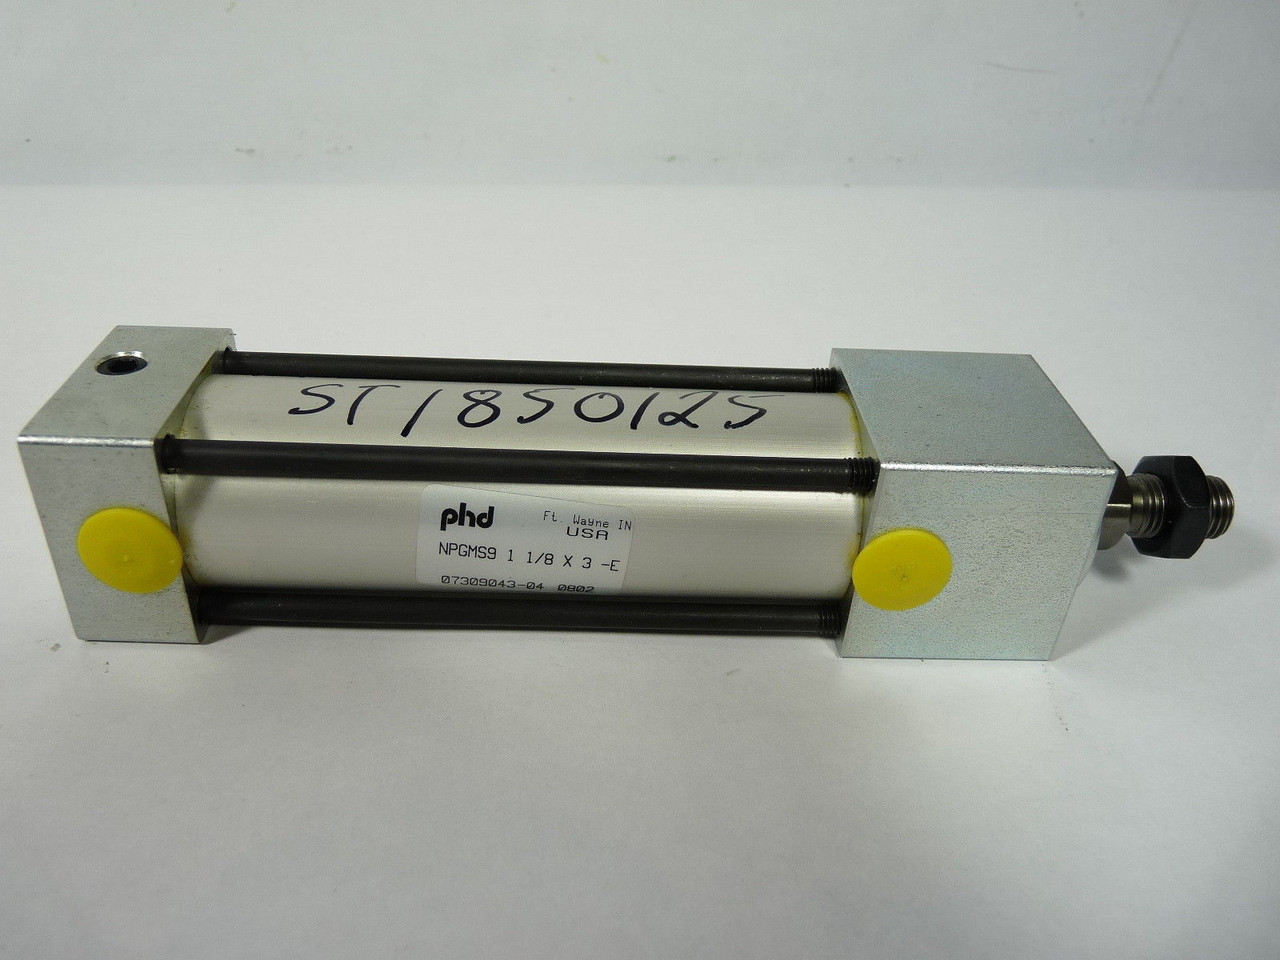 PHD Inc NPGMS9 1-1/8 x 3 Non-Rotating Pneumatic Cylinder USED